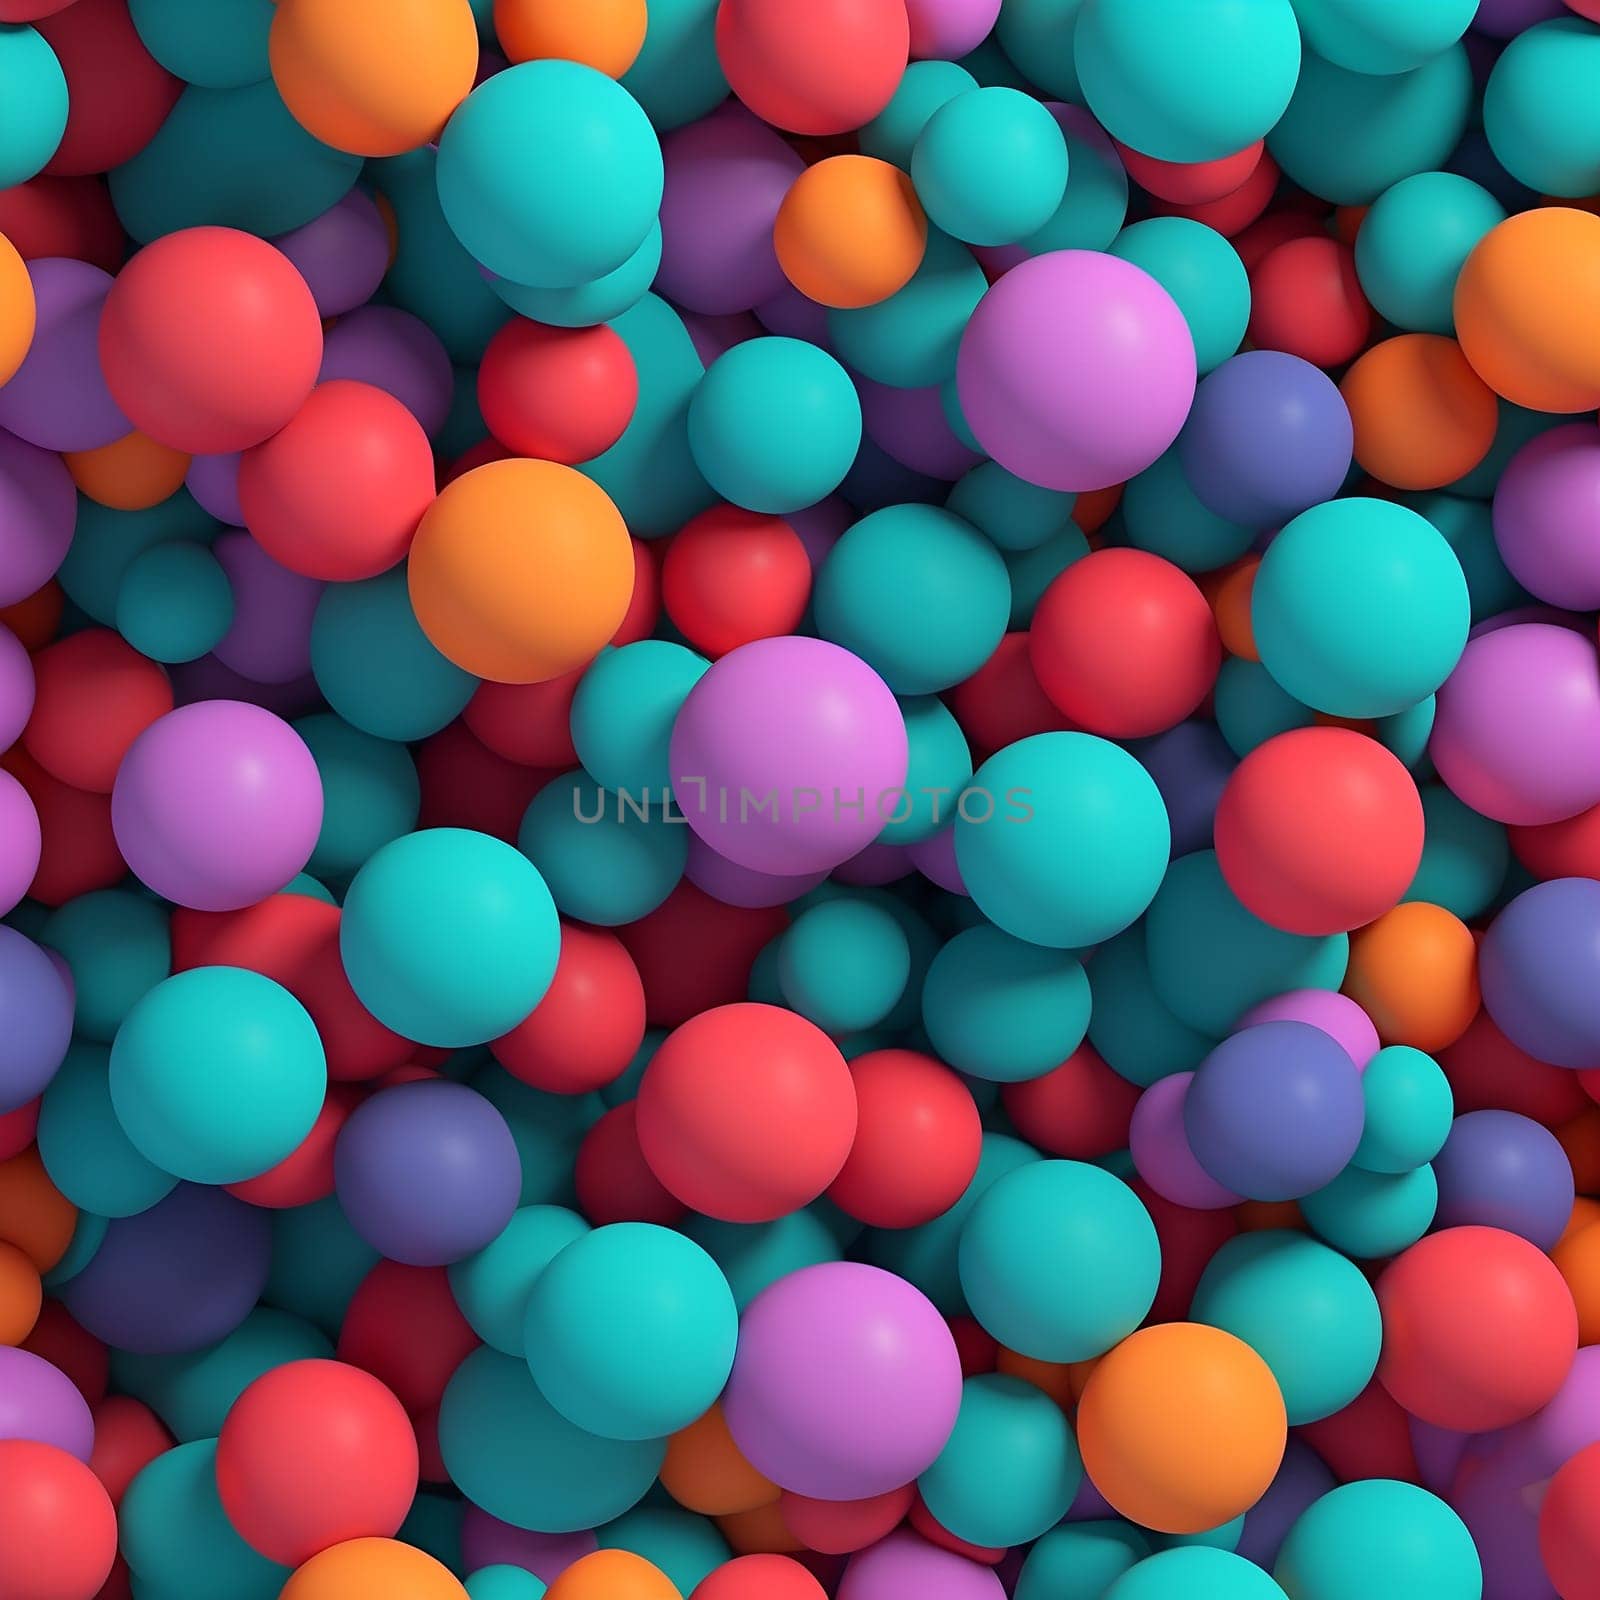 A collection of vibrant balls hover in the air, forming a seamless pattern.